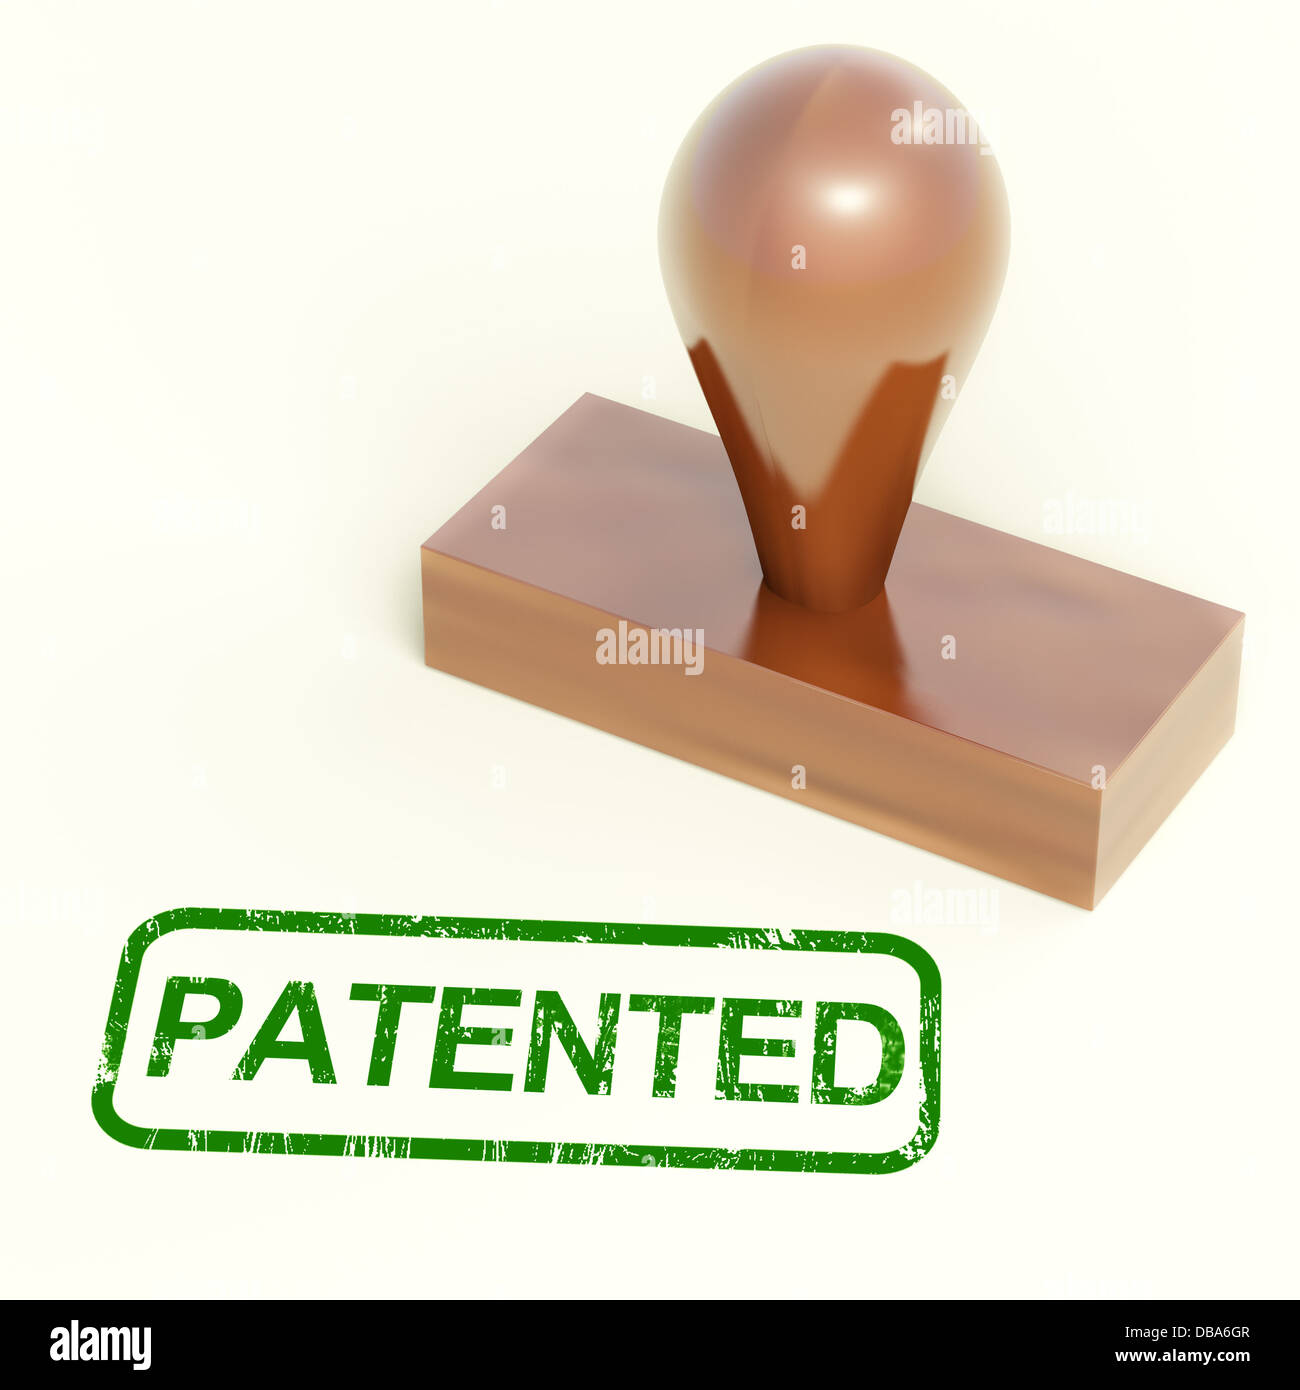 Patented Stamp Shows Trademark Patent Or Registered Stock Photo